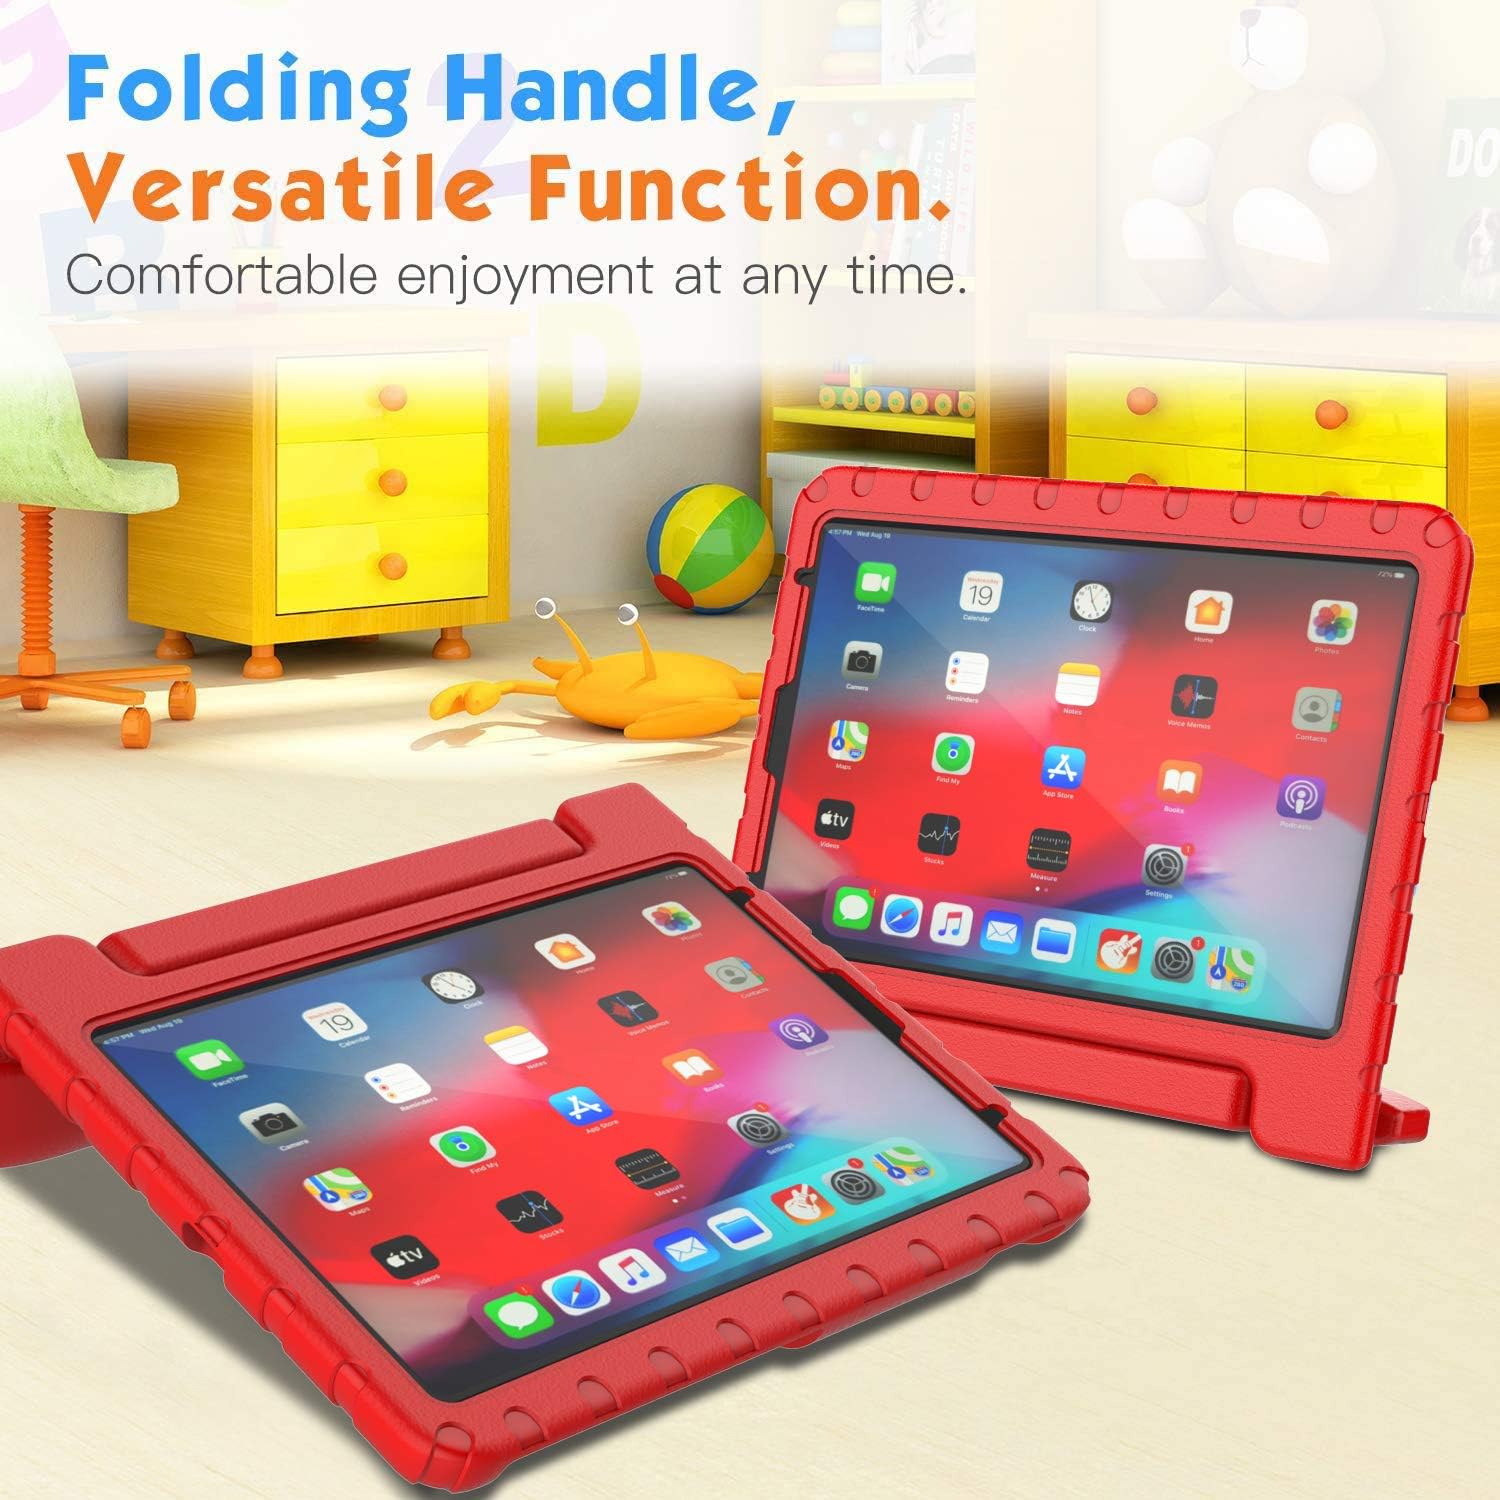 iPad 10.9 inch & 11 inch Shockproof Case w Handle & Stand for iPad Air 5th/4th Generation (10.9 inch) & iPad Pro 11inch (Red) *Free Shipping*